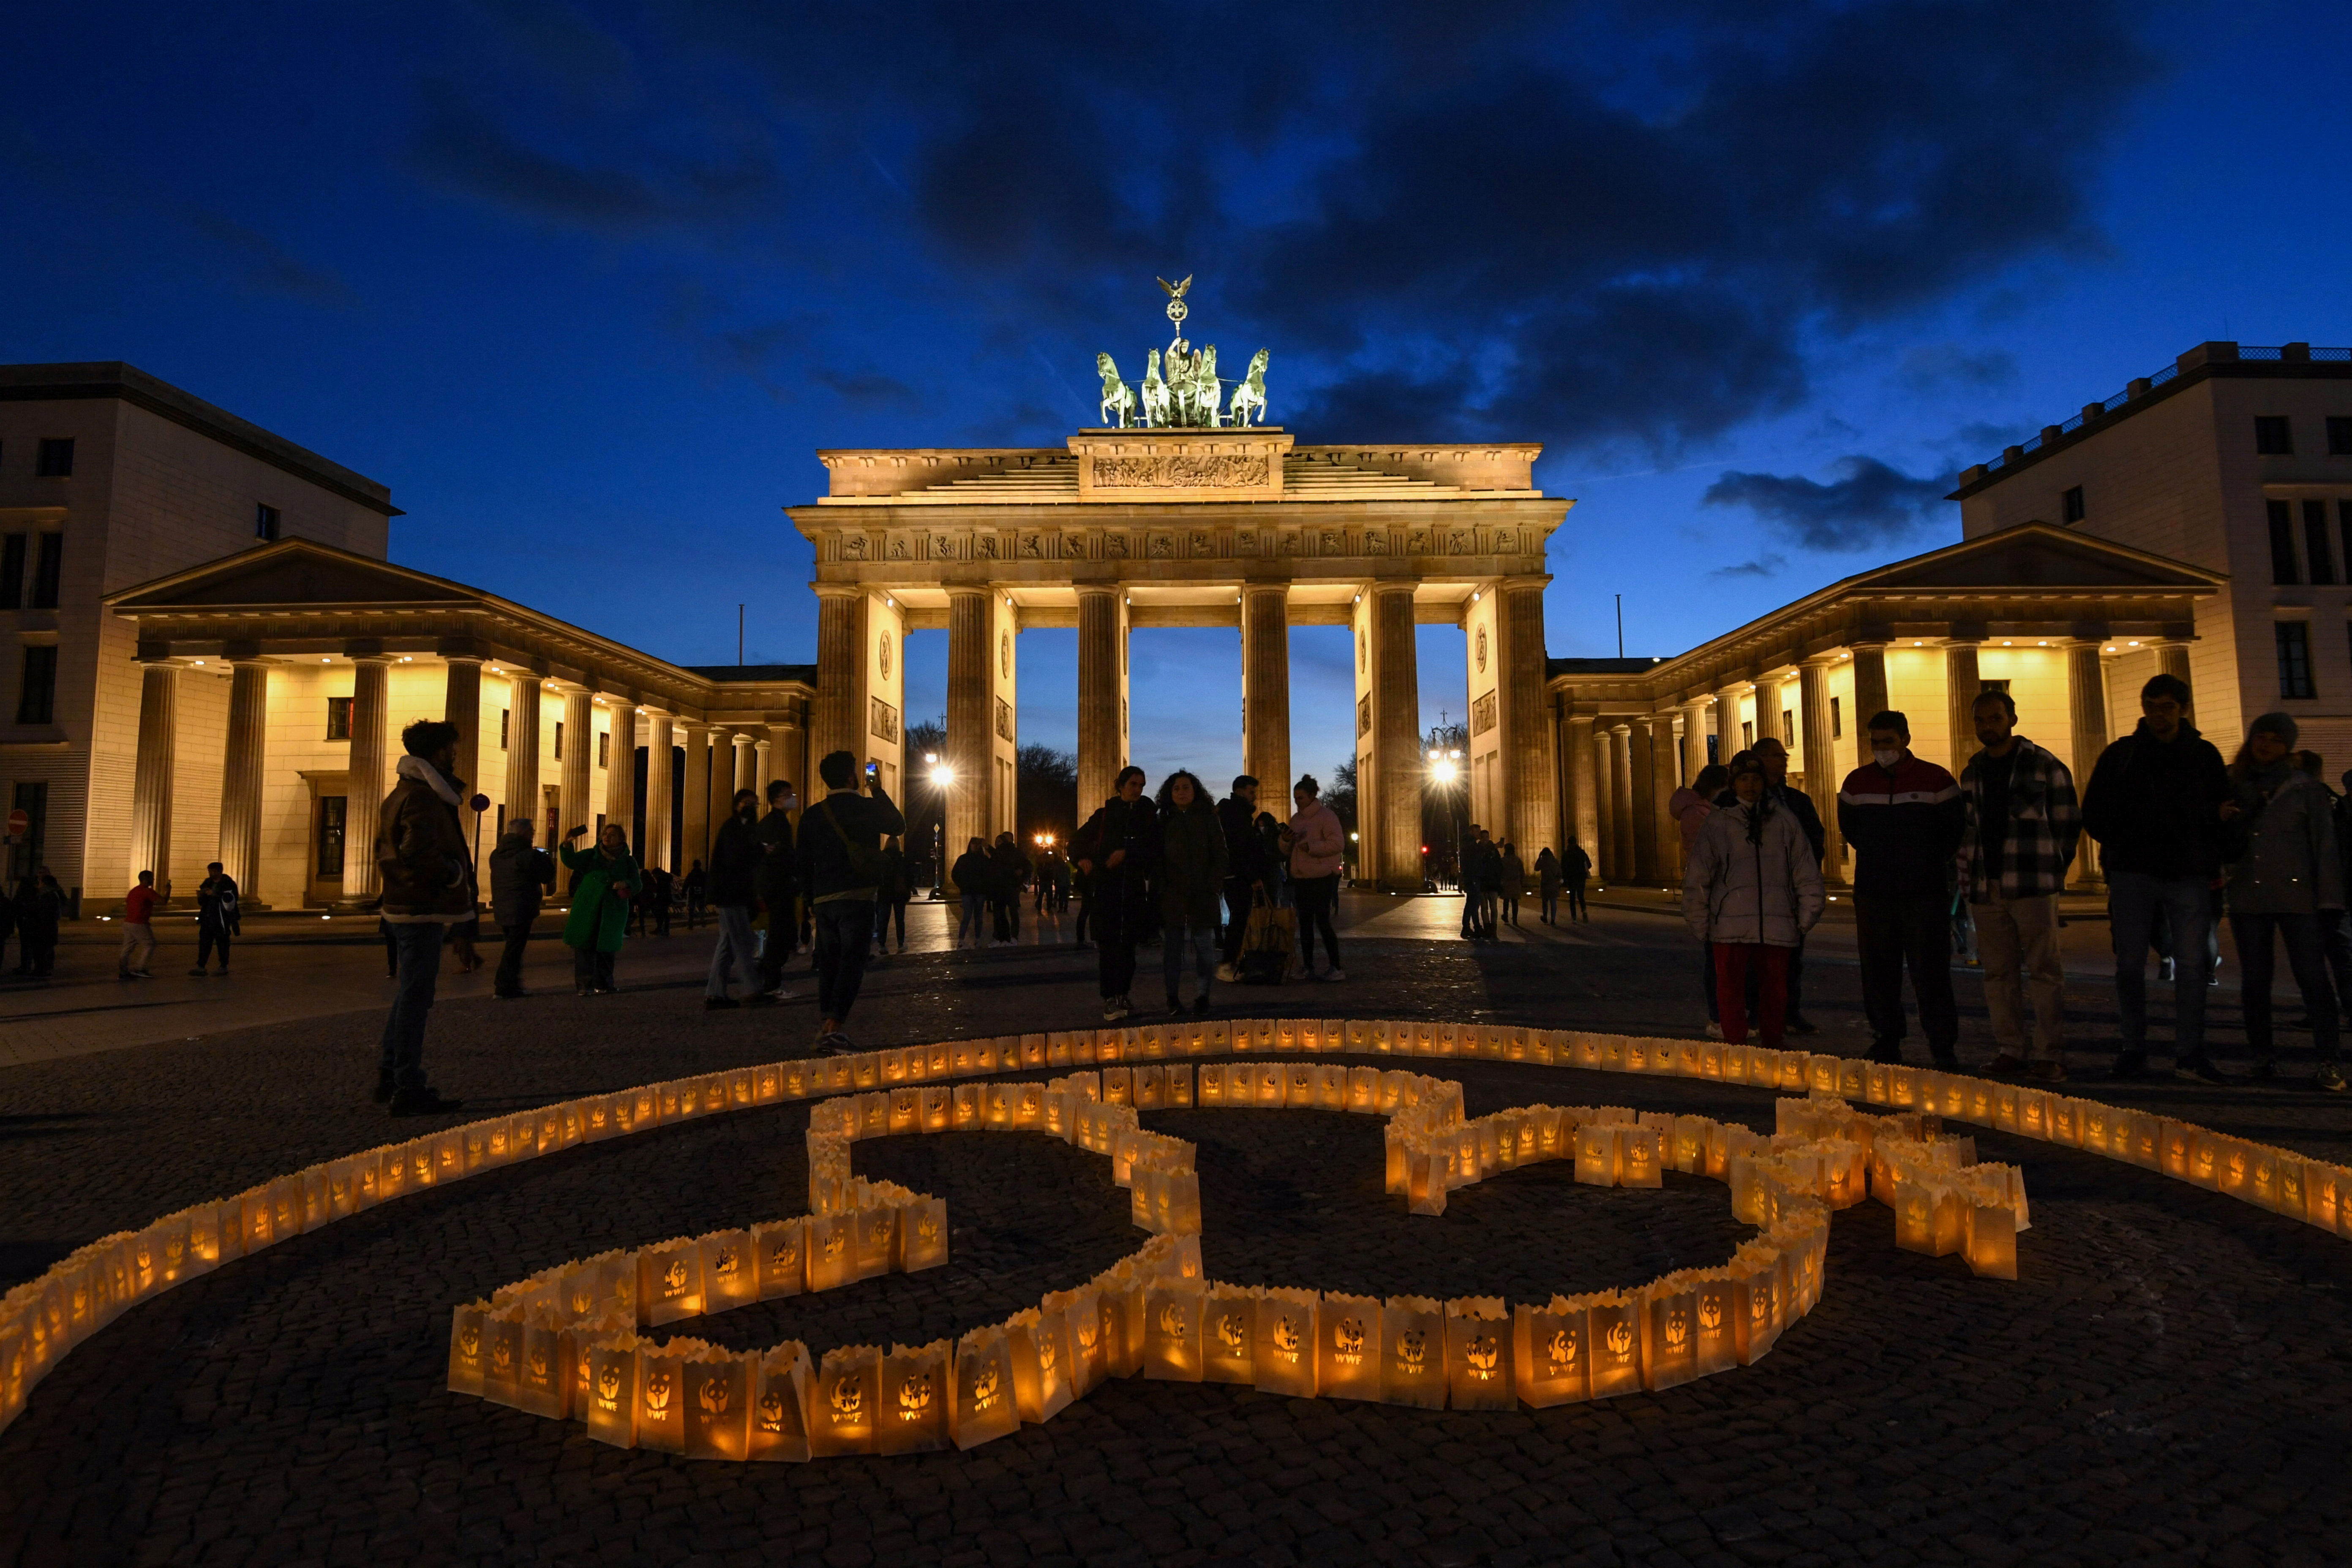 A dove of peace in solidarity with the victims of the Russian invasion of Ukraine installed by LED lights in front of the Brandenburg Gate before the lights go out to celebrate Earth Hour in Berlin, Germany, March 26, 2022. REUTERS/Annegret Hilse